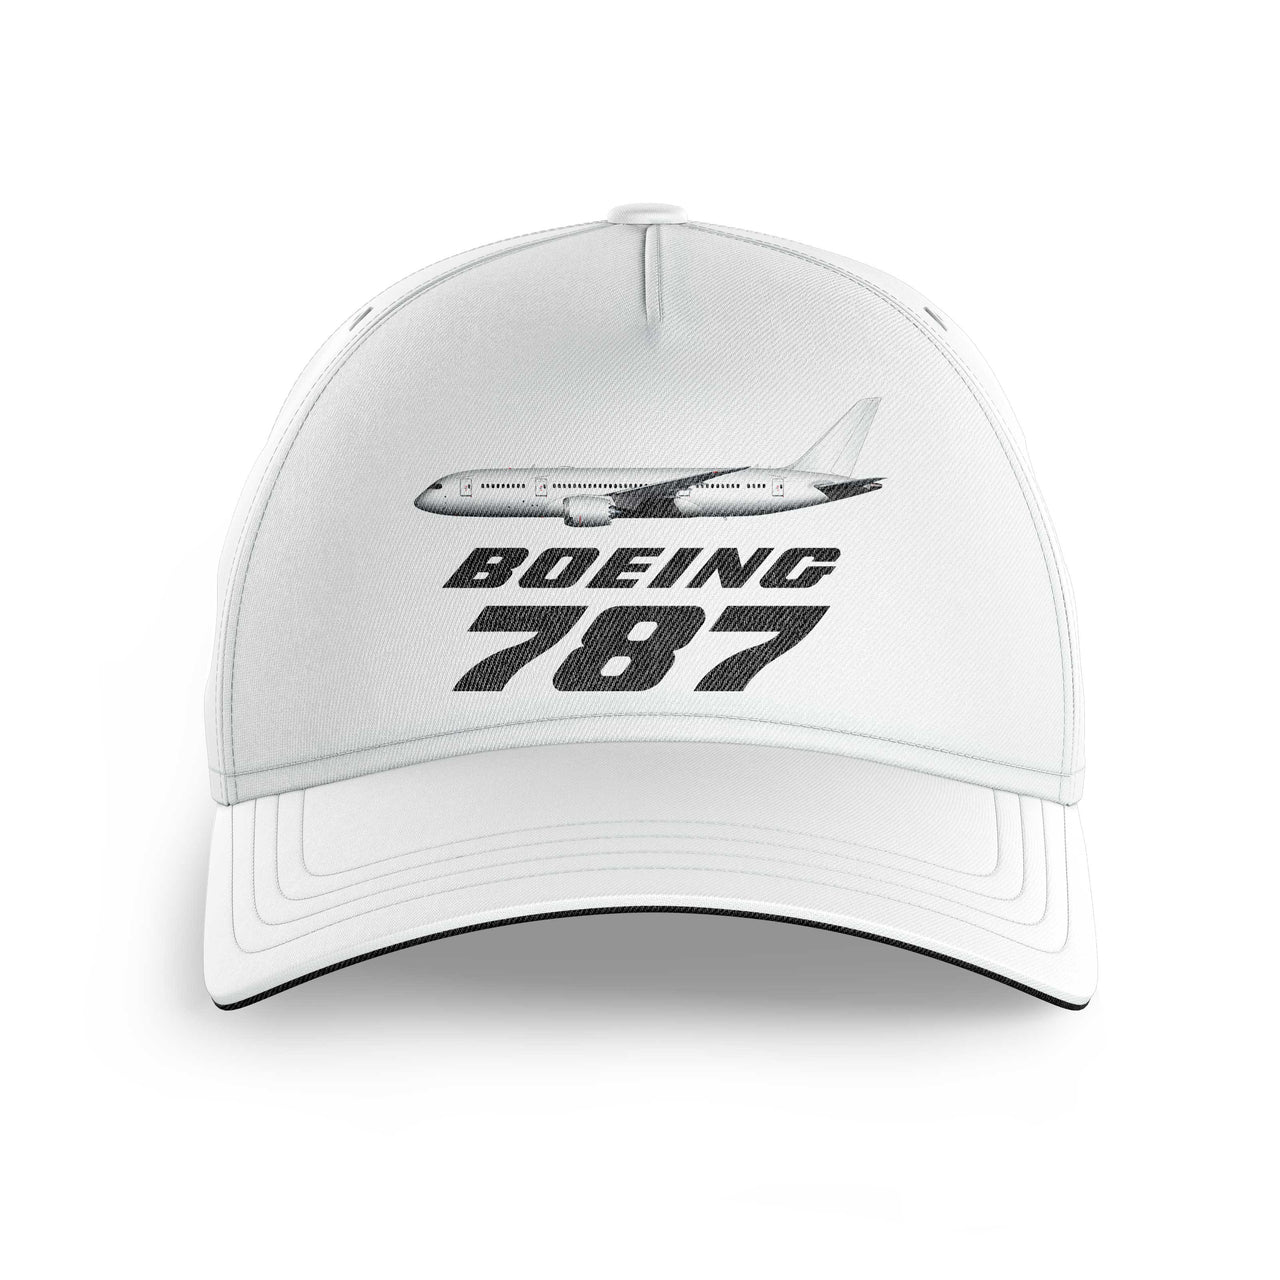 The Boeing 787 Printed Hats